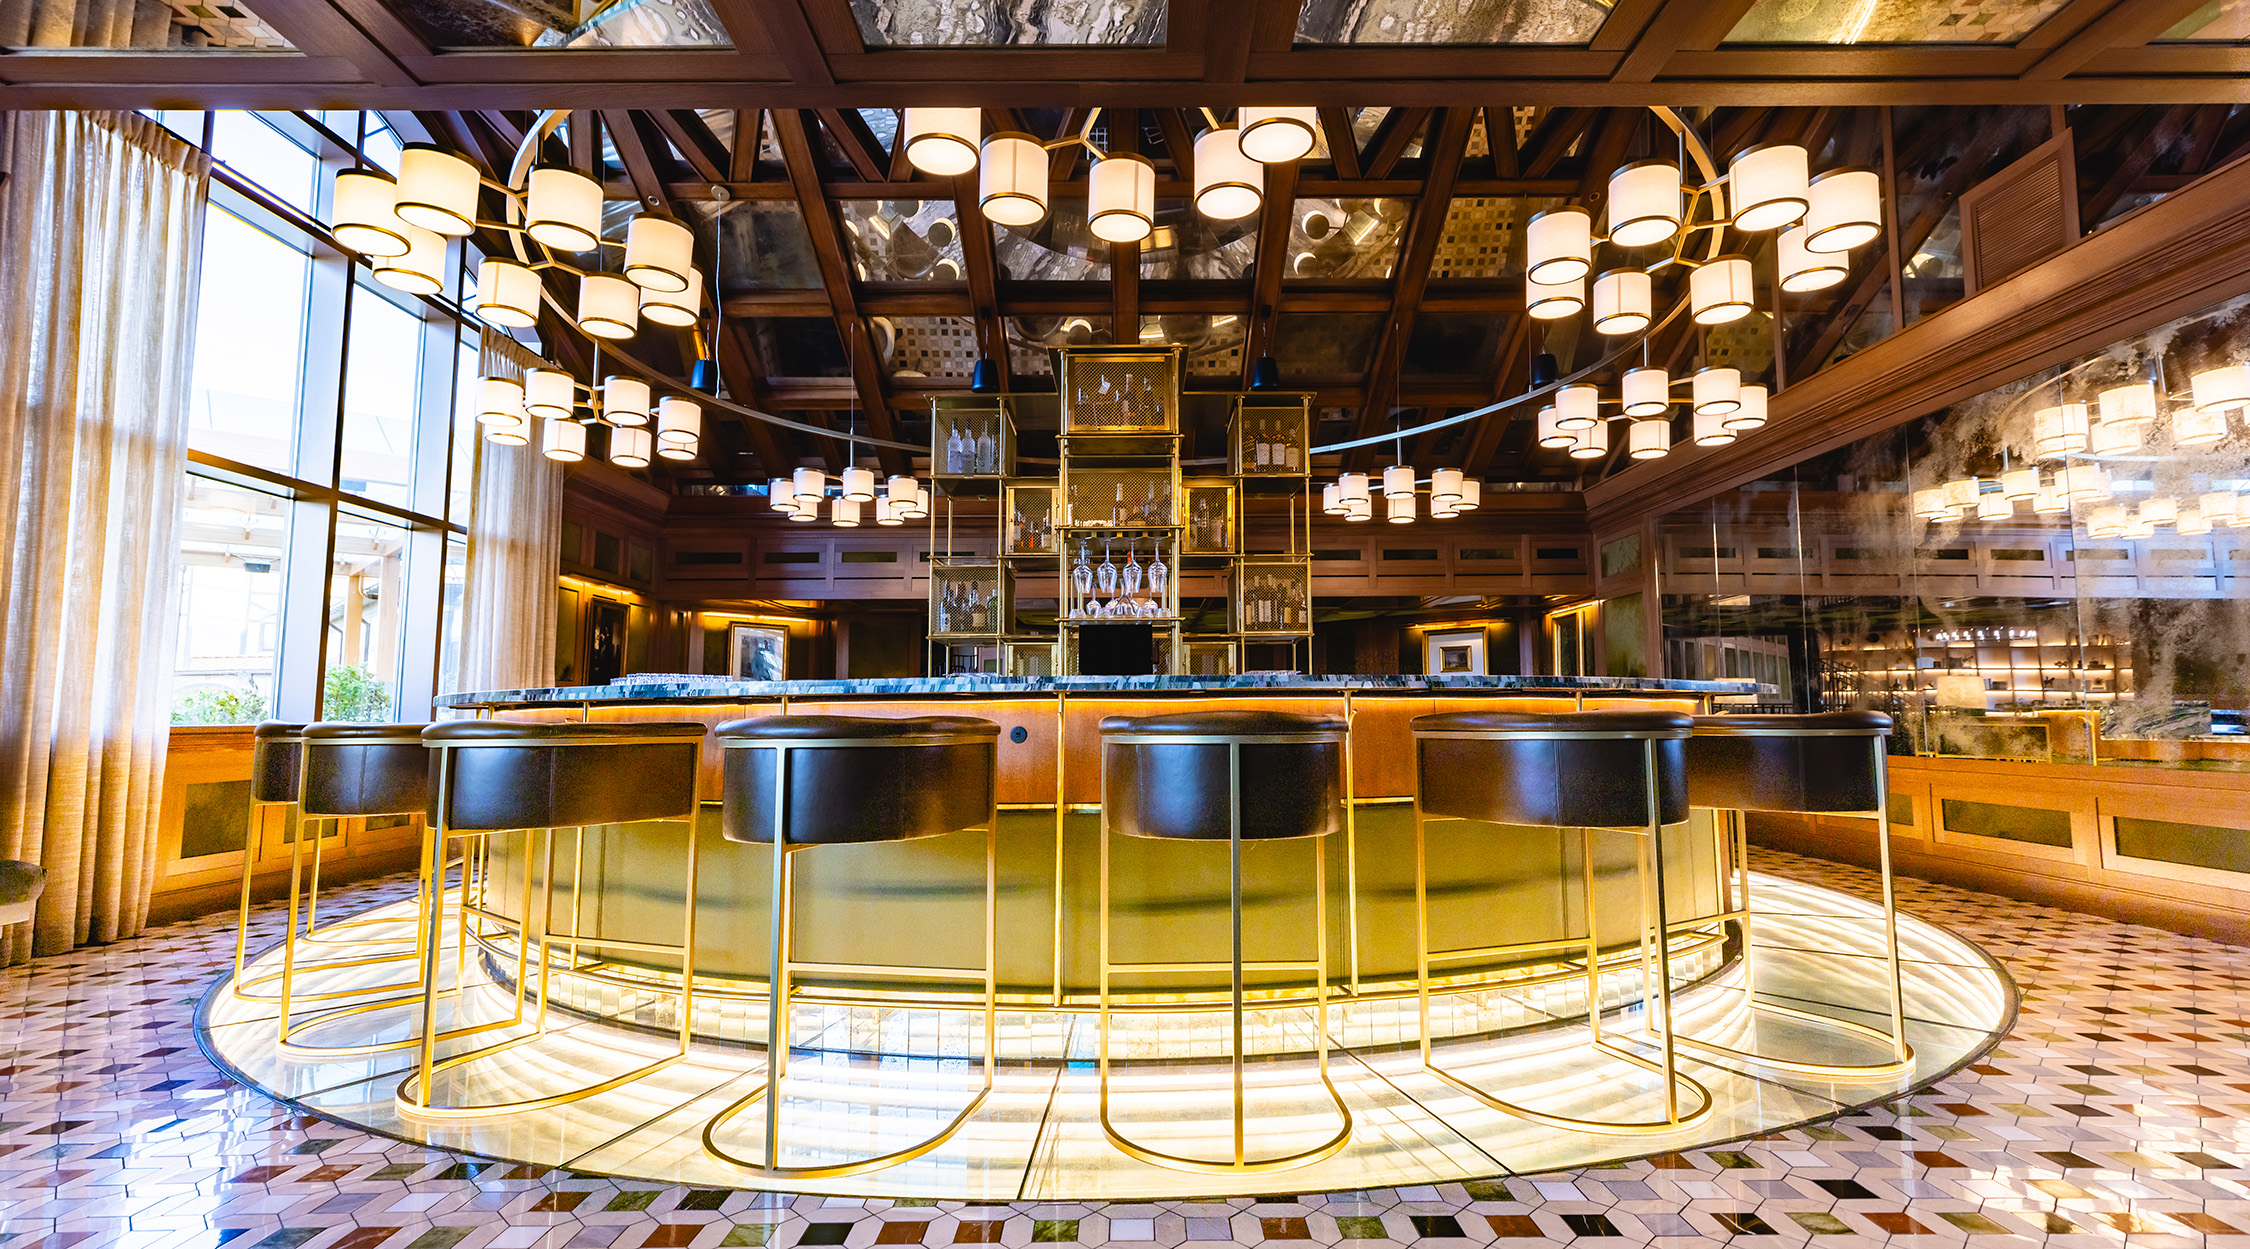 The Circle Bar at The Grand Lodge at Nemacolin features a circular bar surrounded by bar stools, mosiac tile and mirrored flooring, and numerous overhead chandeliers in a modern space that houses a mid-century feel